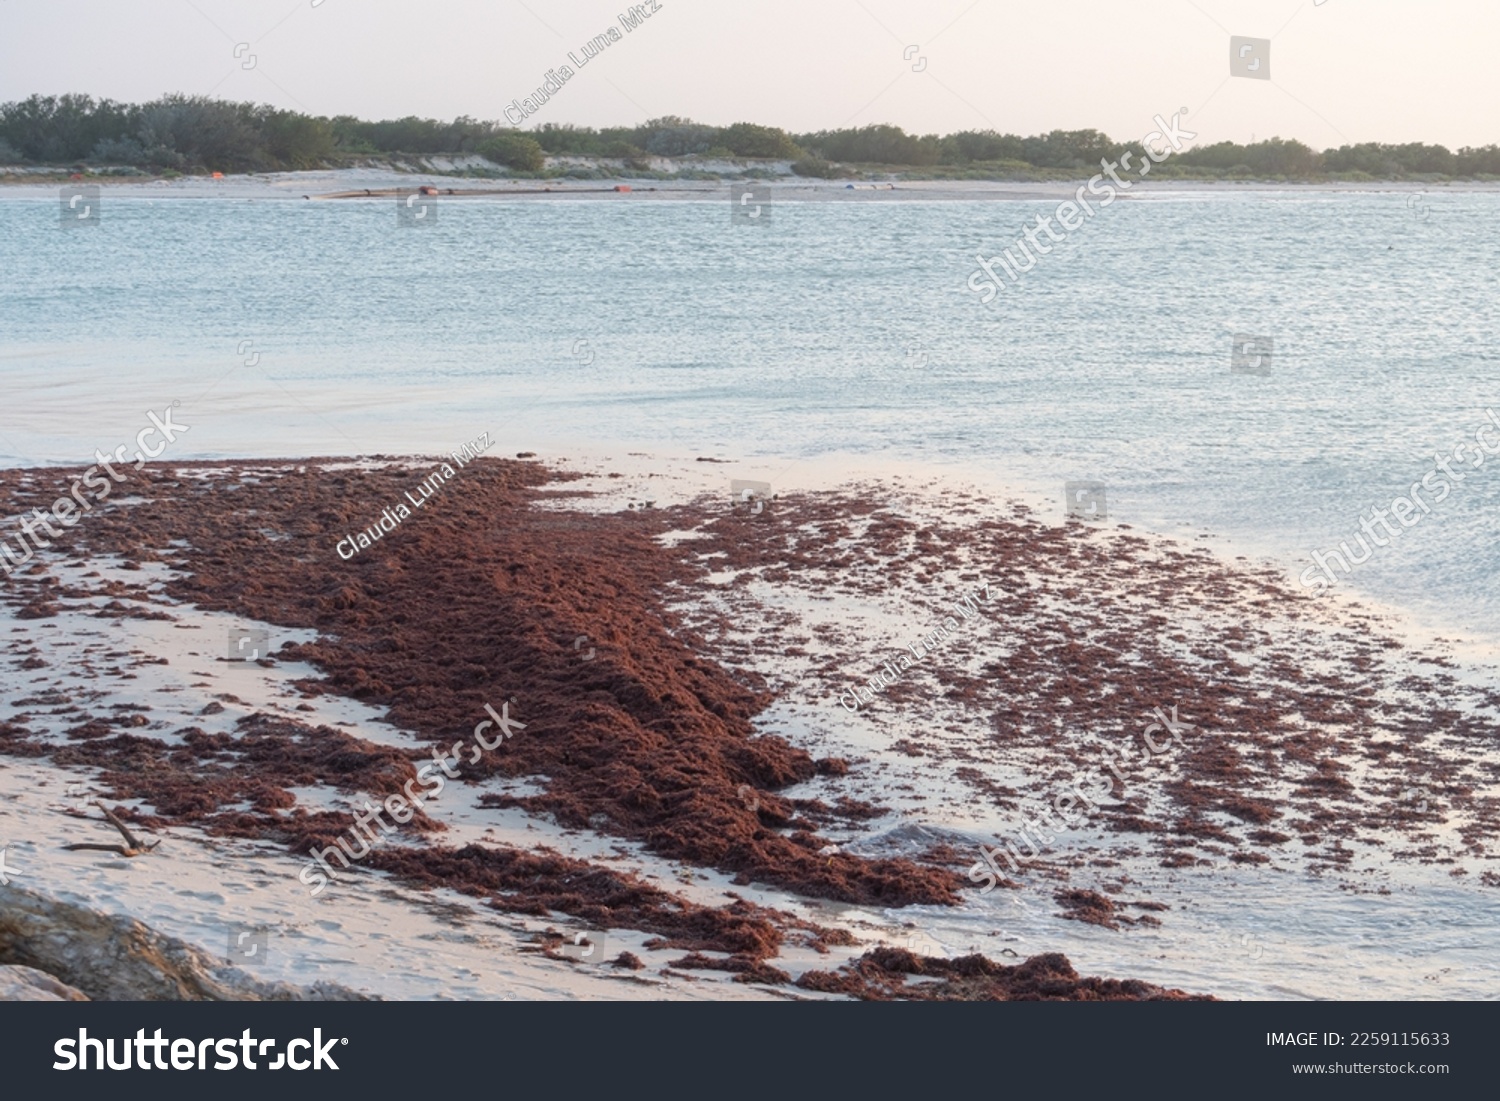 Beach landscape on the Mexican coast of Yucatan of a calm sea with sargassum floating on the shore. #2259115633